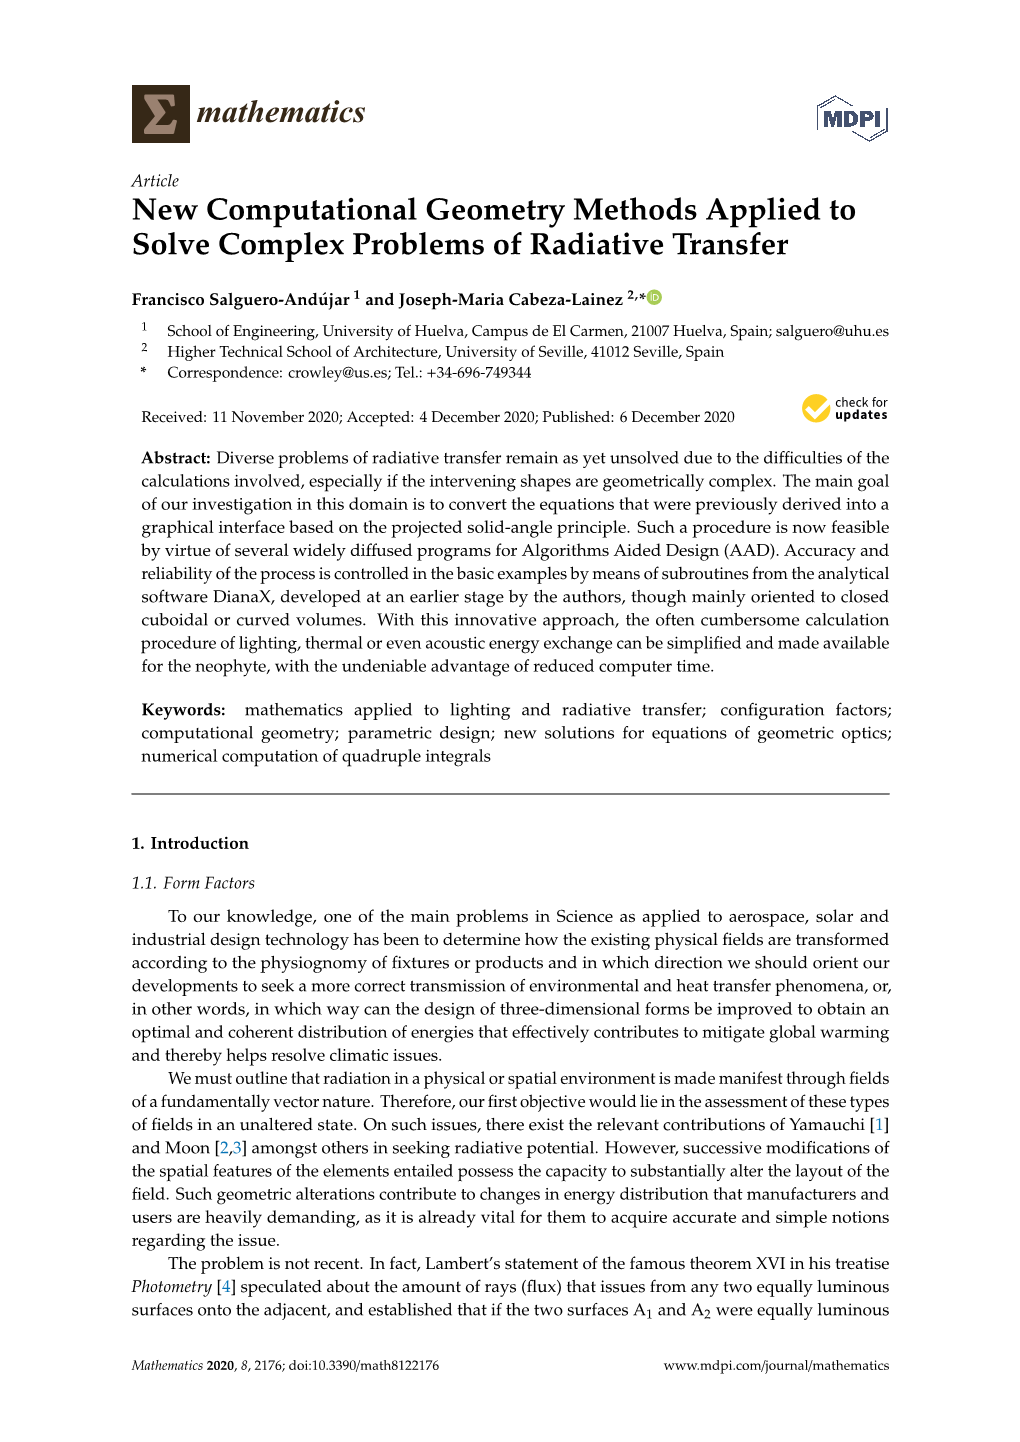 New Computational Geometry Methods Applied to Solve Complex Problems of Radiative Transfer